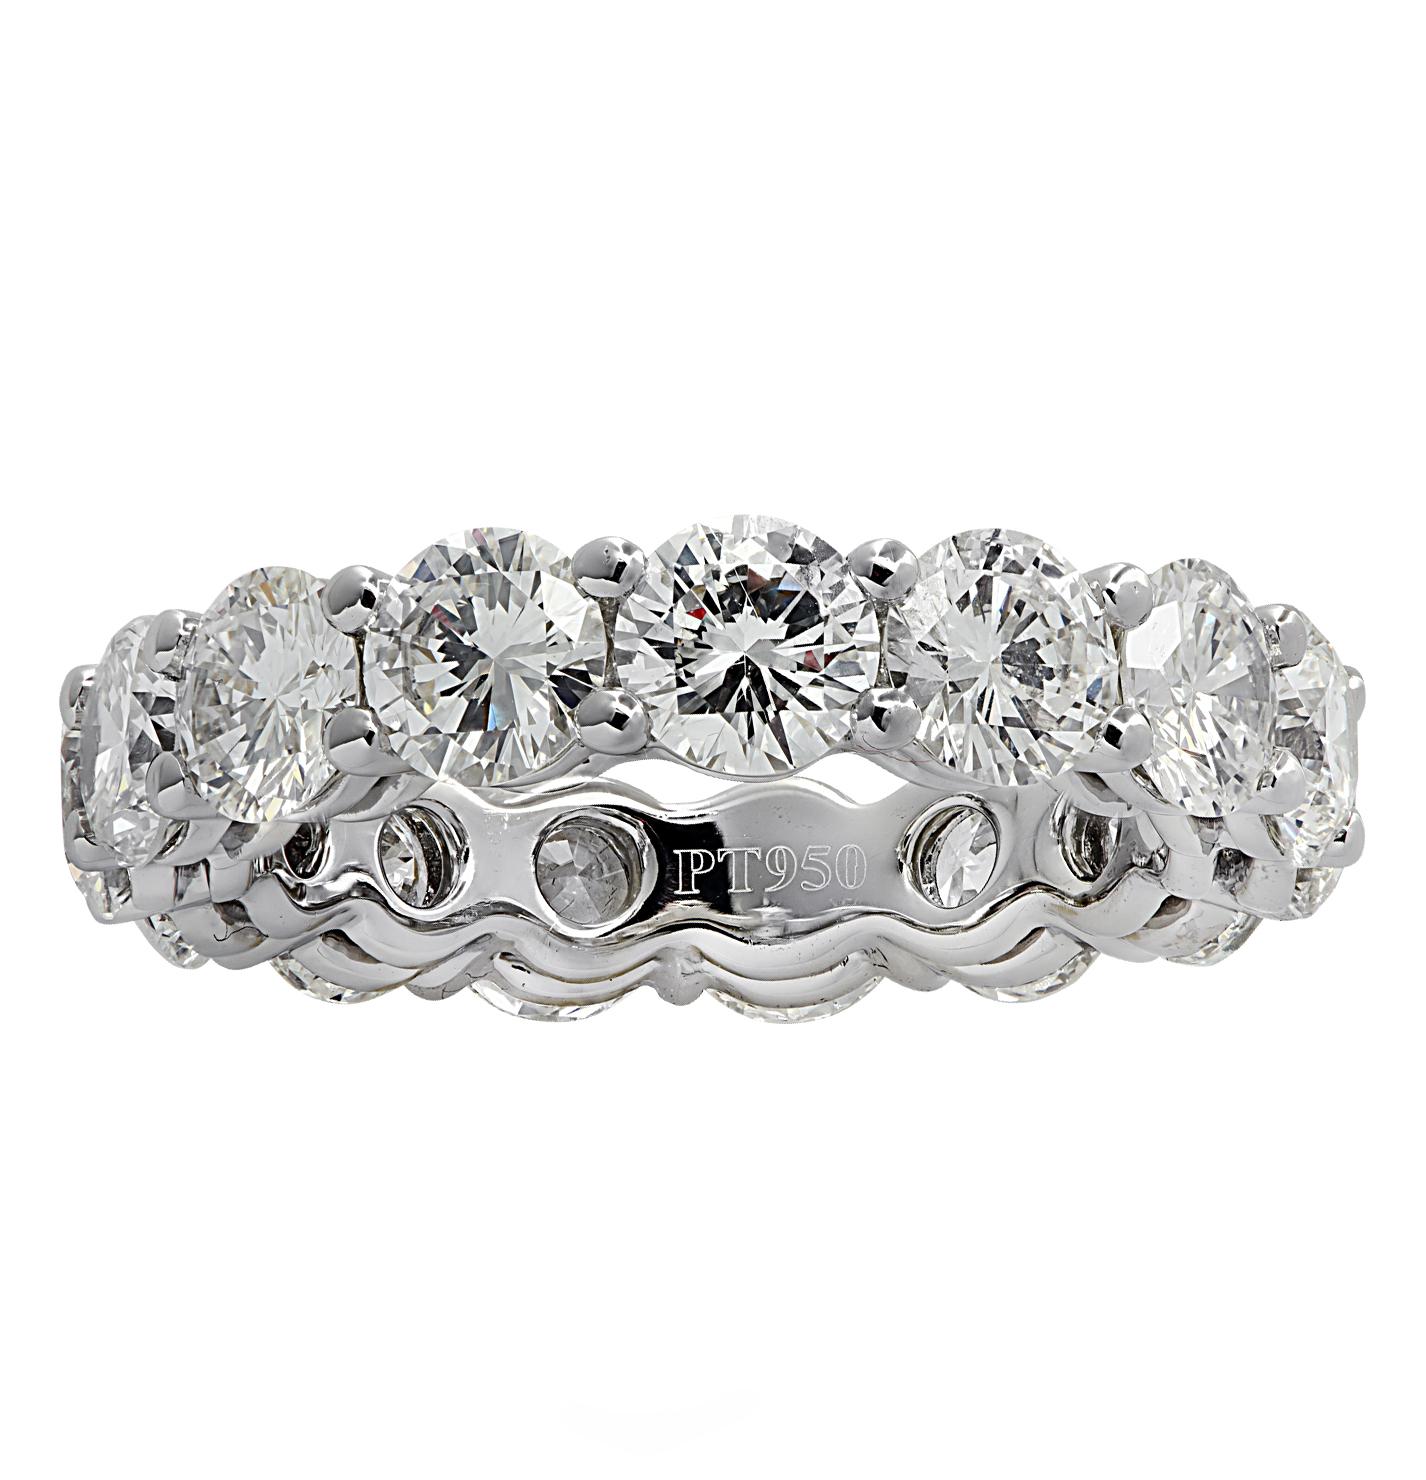 Exquisite eternity band crafted in Platinum, showcasing 15 stunning round brilliant cut diamonds weighing 5.80 carats total, H-I color, VS-SI clarity. Each diamond is carefully selected, perfectly matched and set in a seamless sea of eternity,